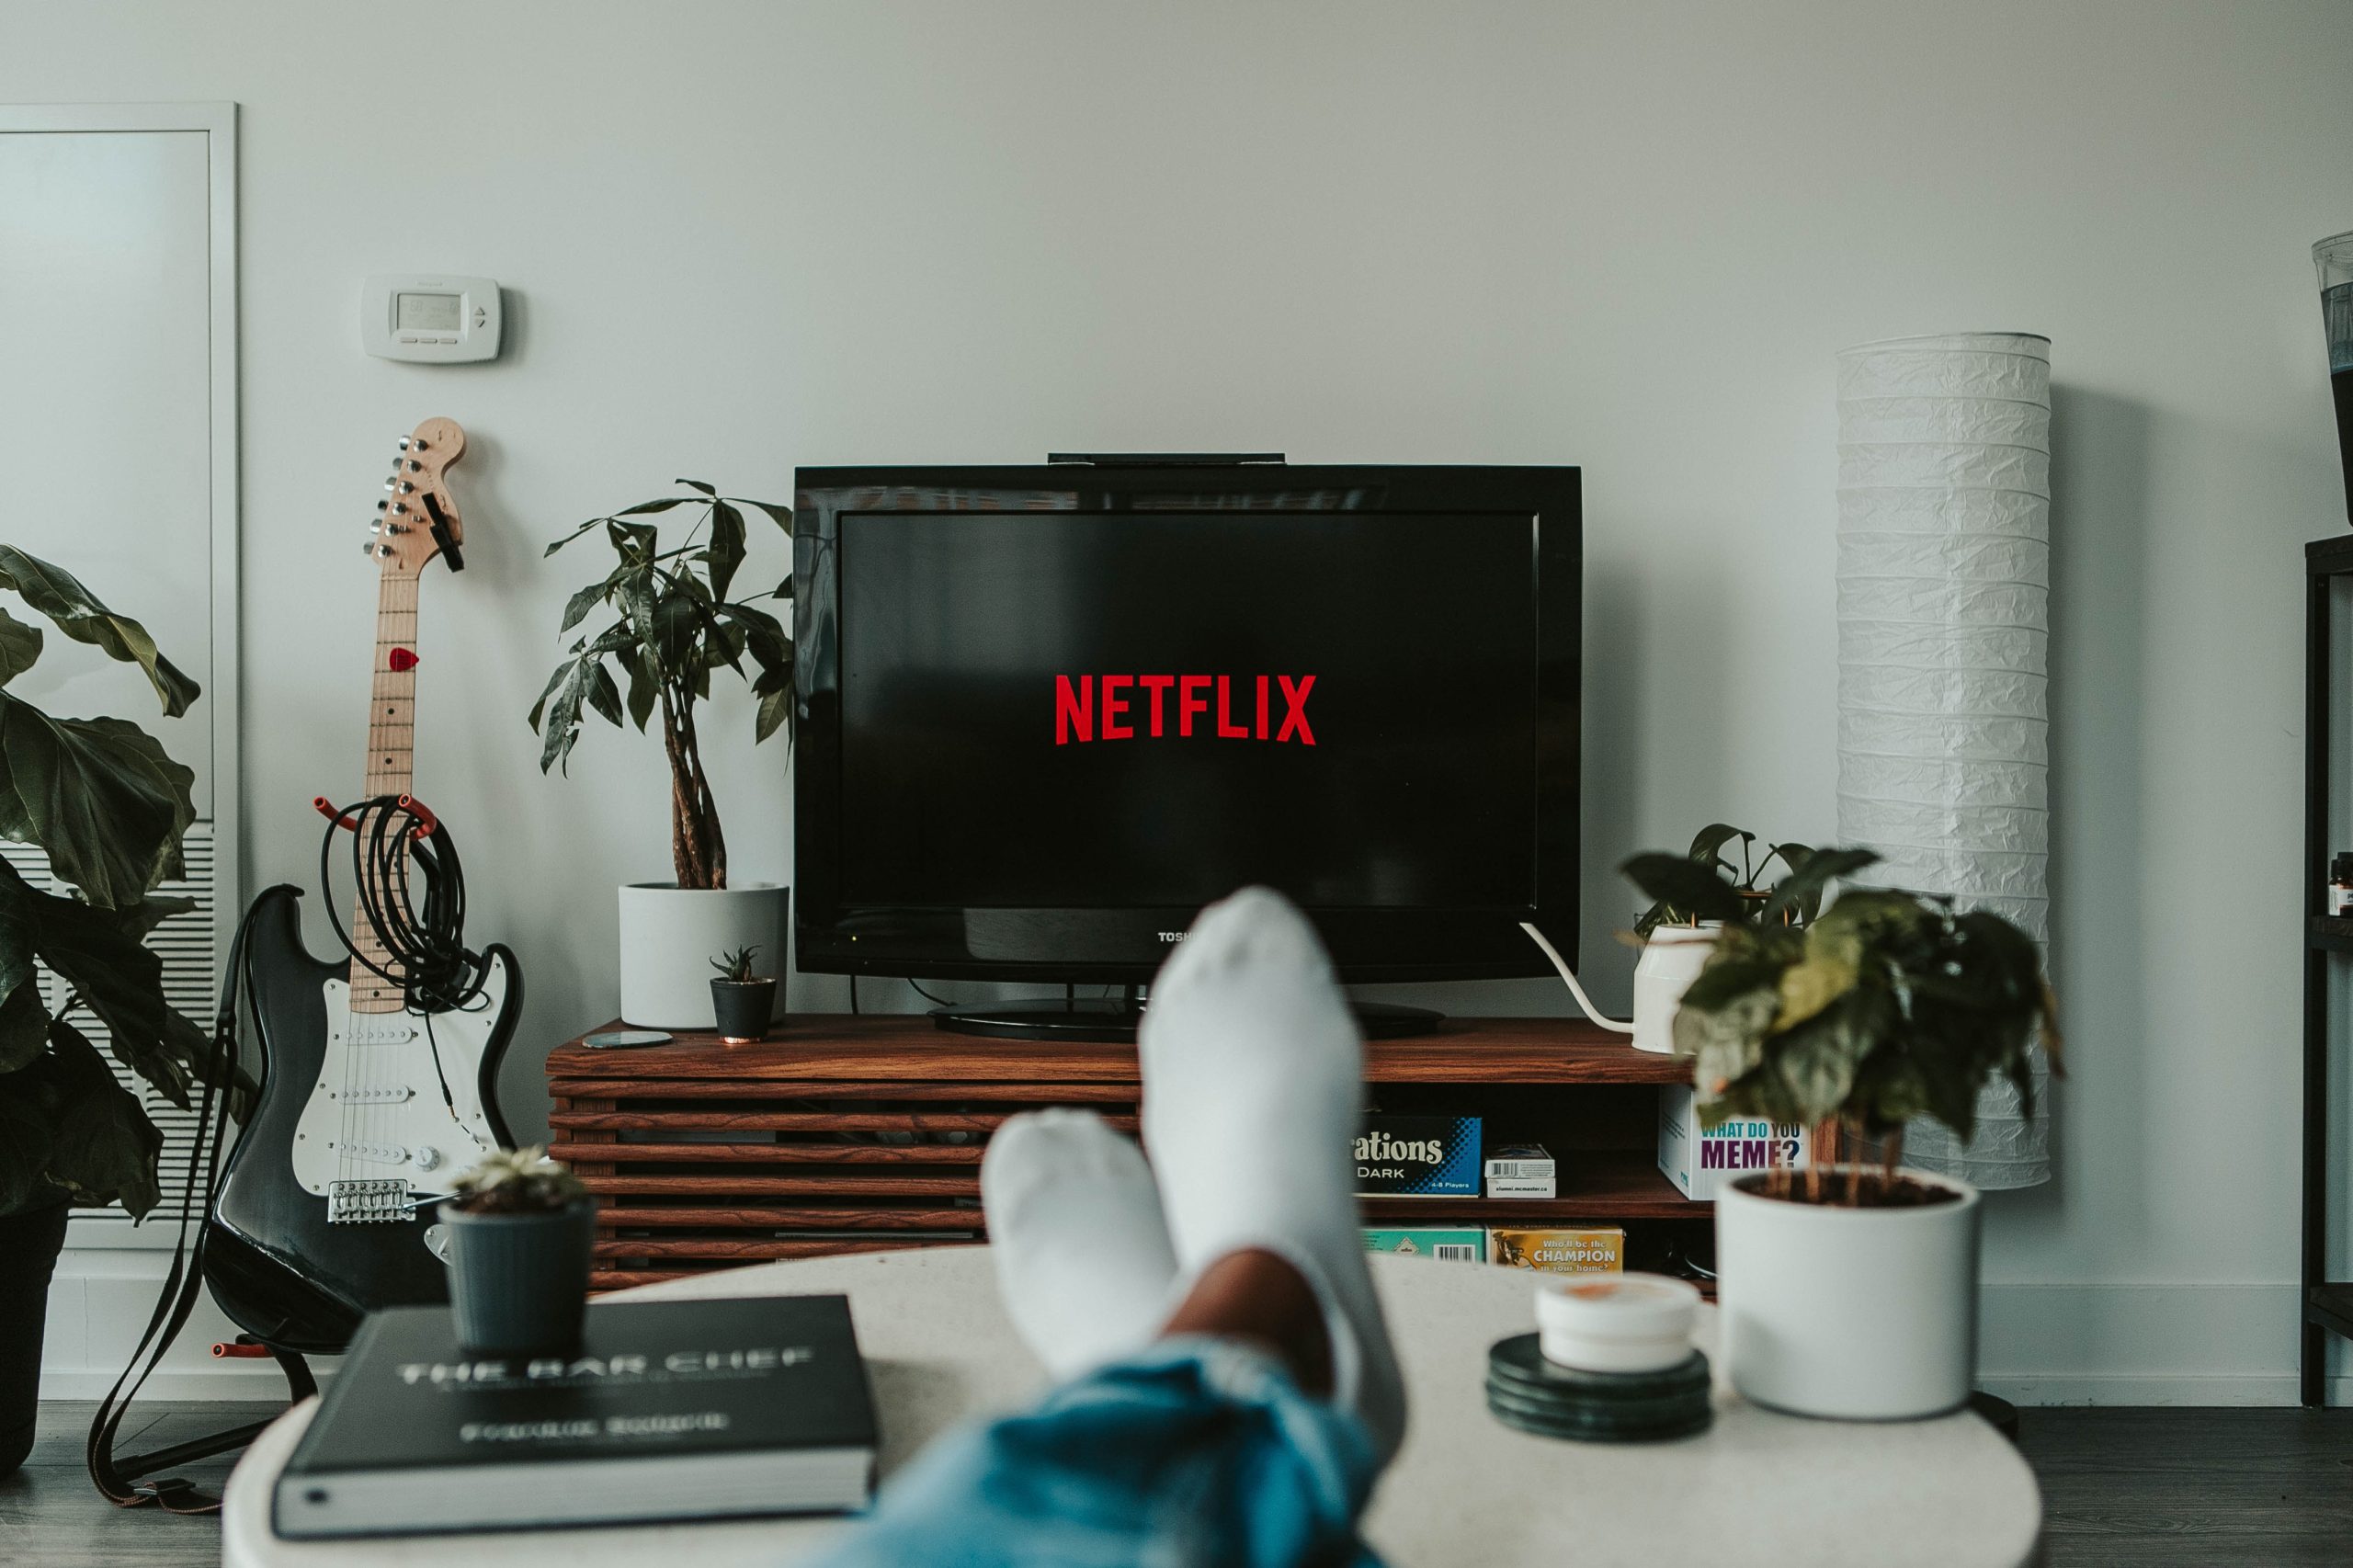 Man with feet on coffee table and a TV with Netflix logo in the background.